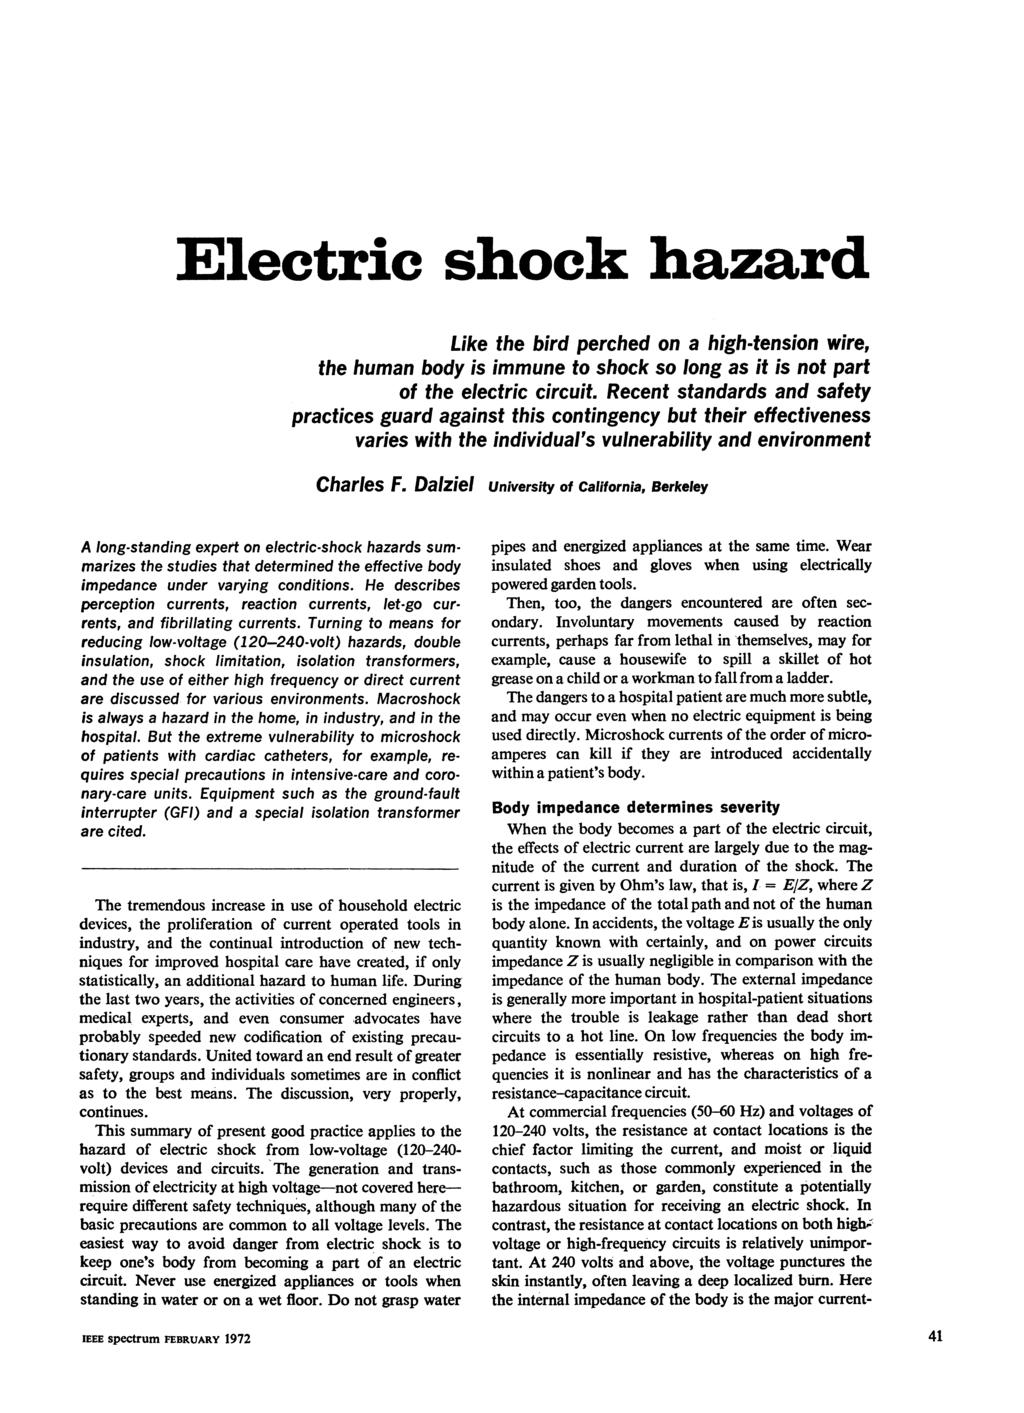 Electric shock hazard Like the bird perched on a high-tension wire, the human body is immune to shock so long as it is not part of the electric circuit.